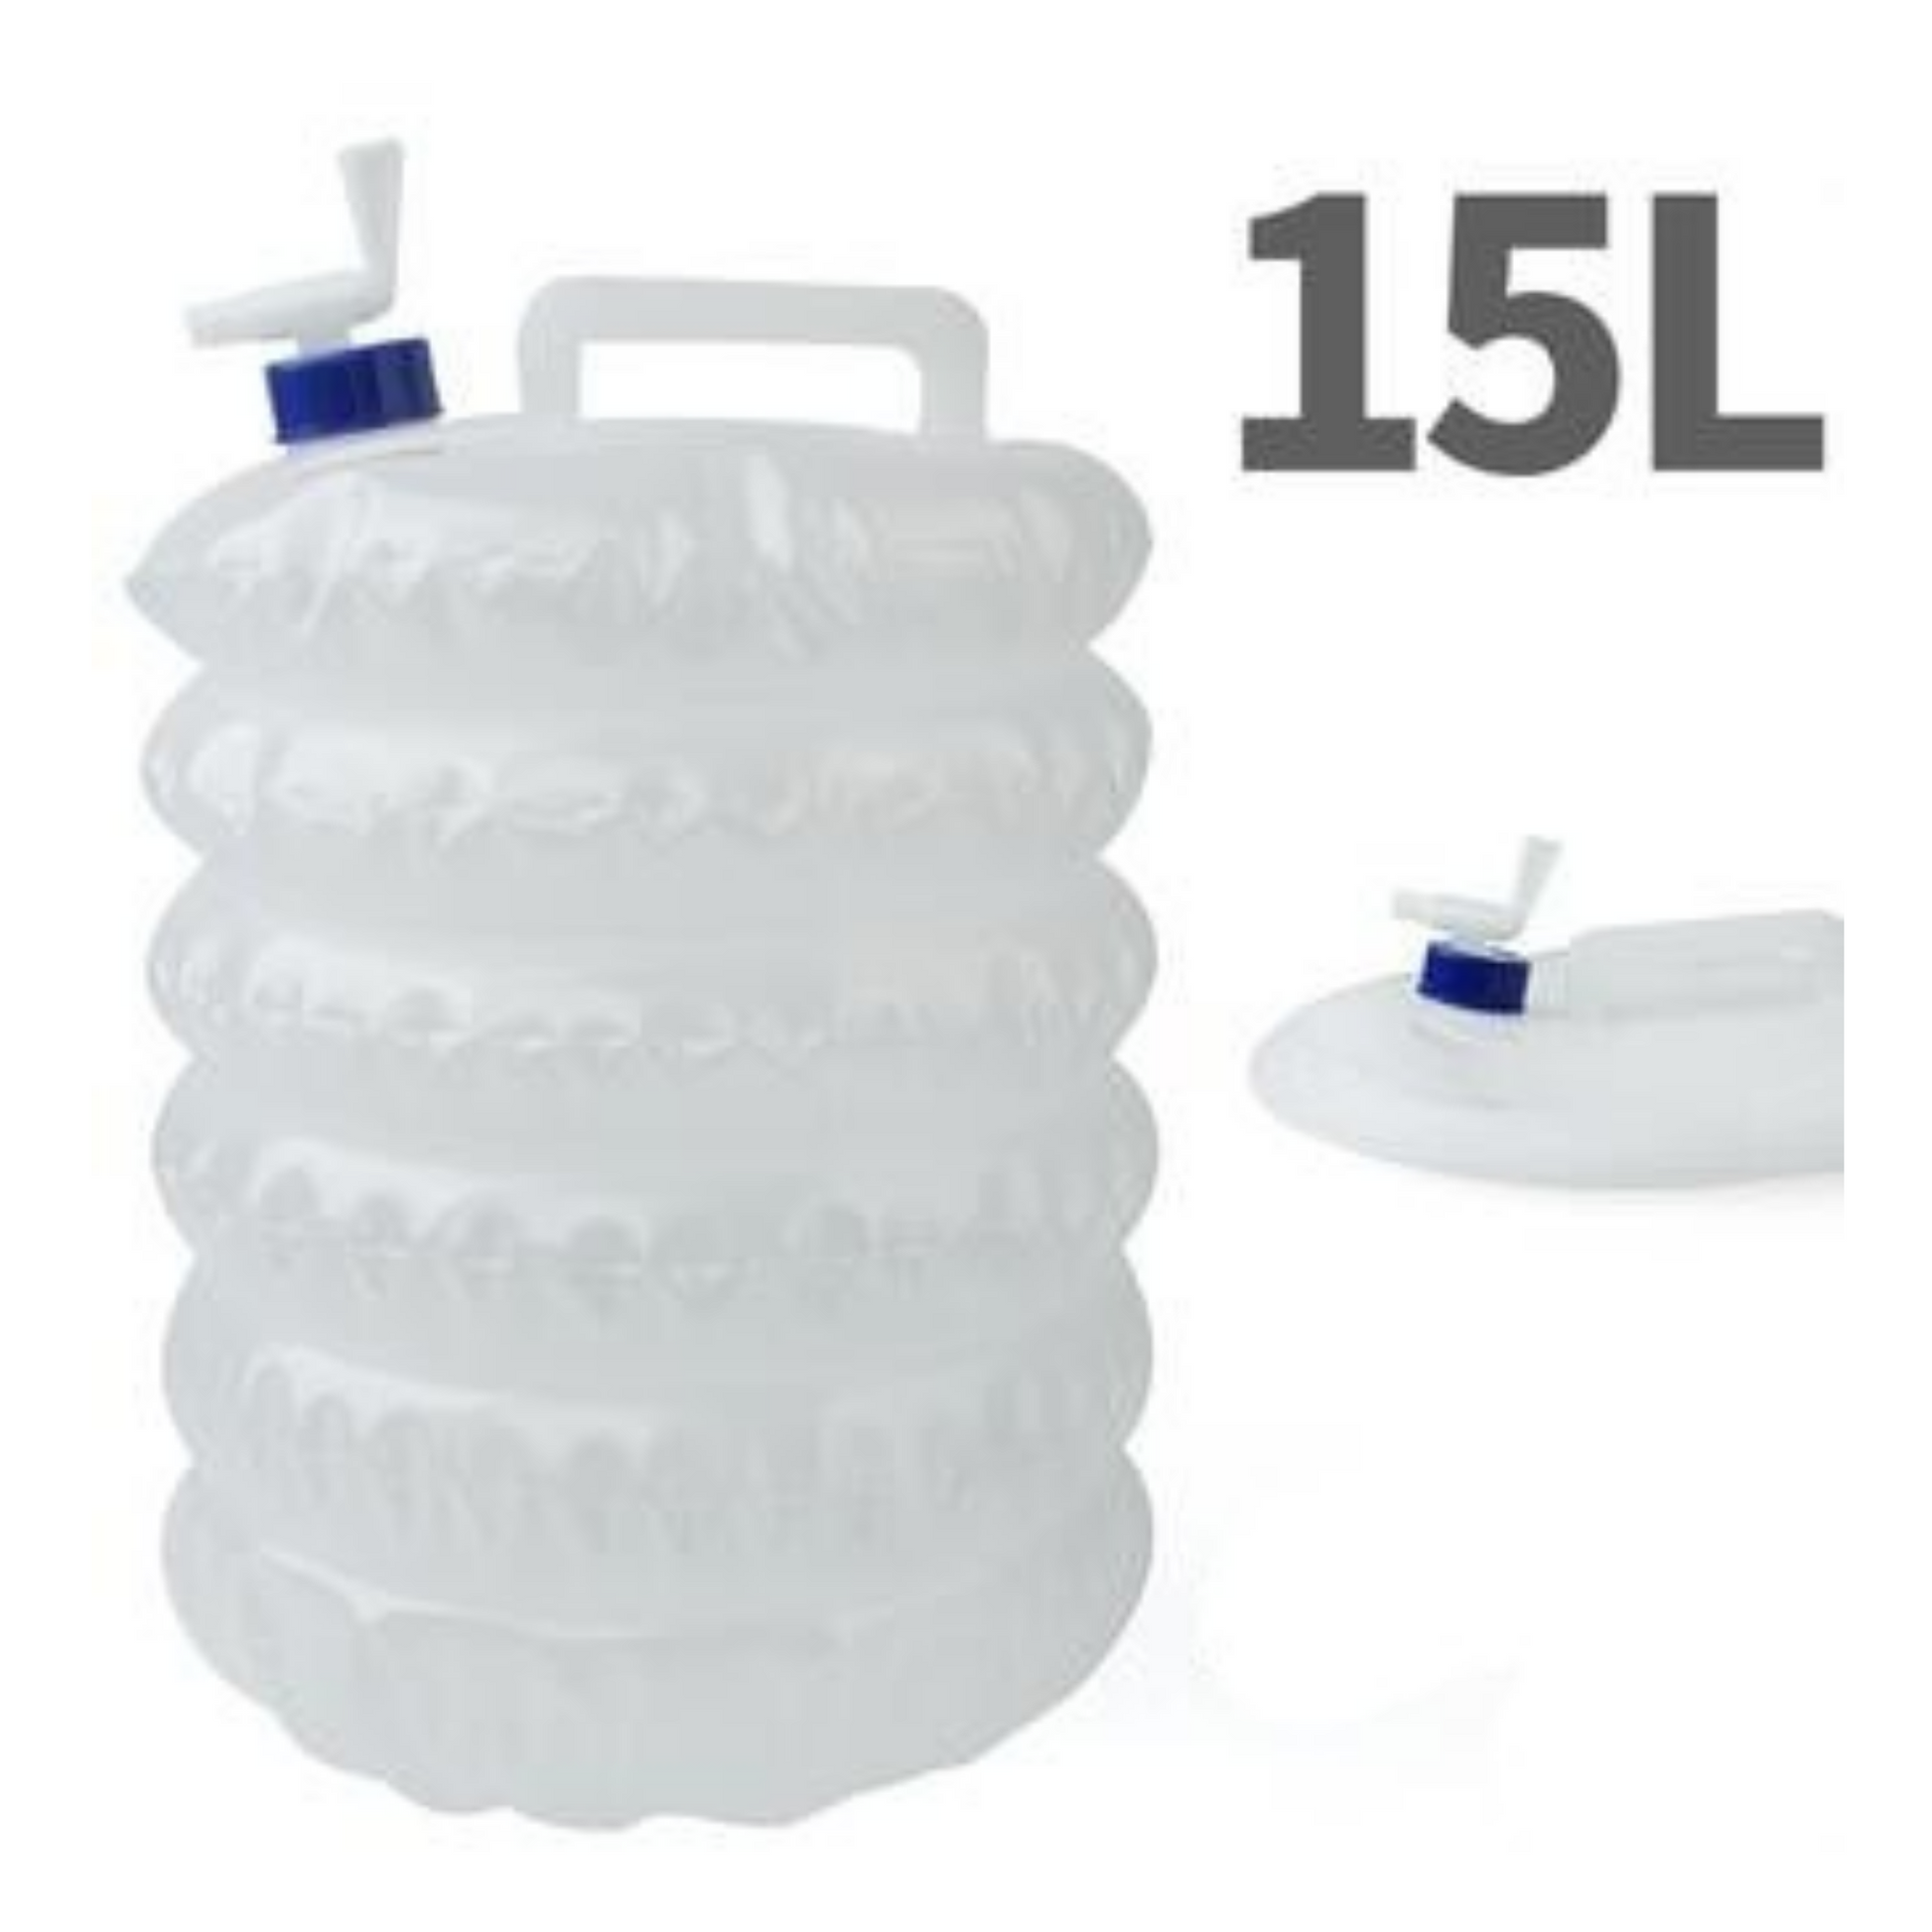 15L container with adjustable spigot and ergonomic handle